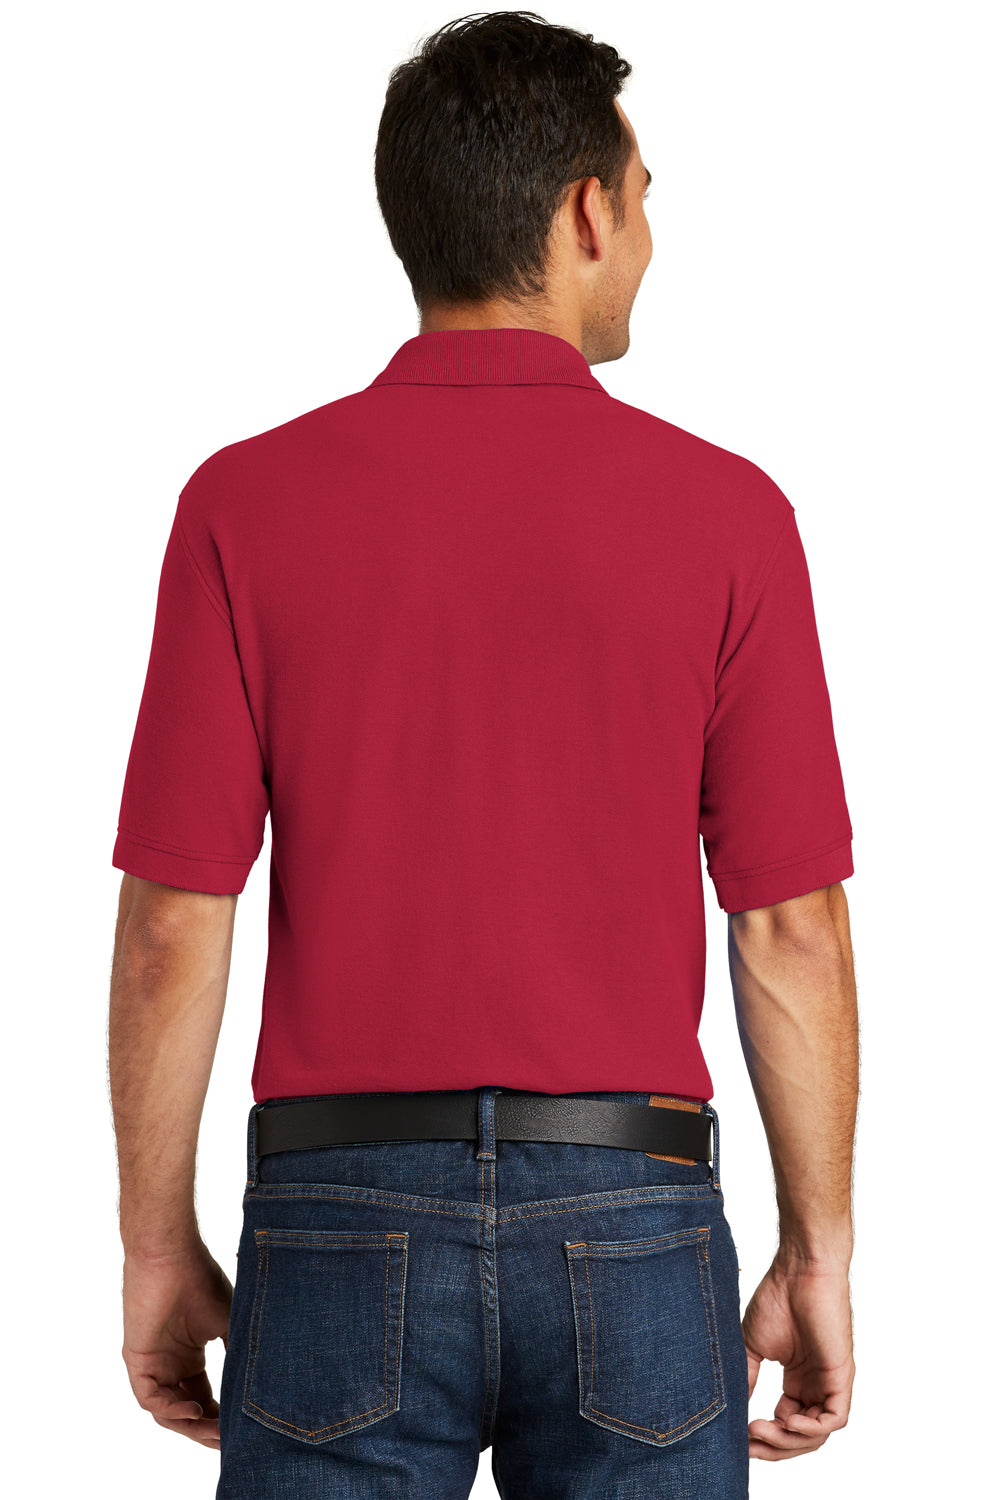 Port & Company KP155 Mens Core Stain Resistant Short Sleeve Polo Shirt Red Back